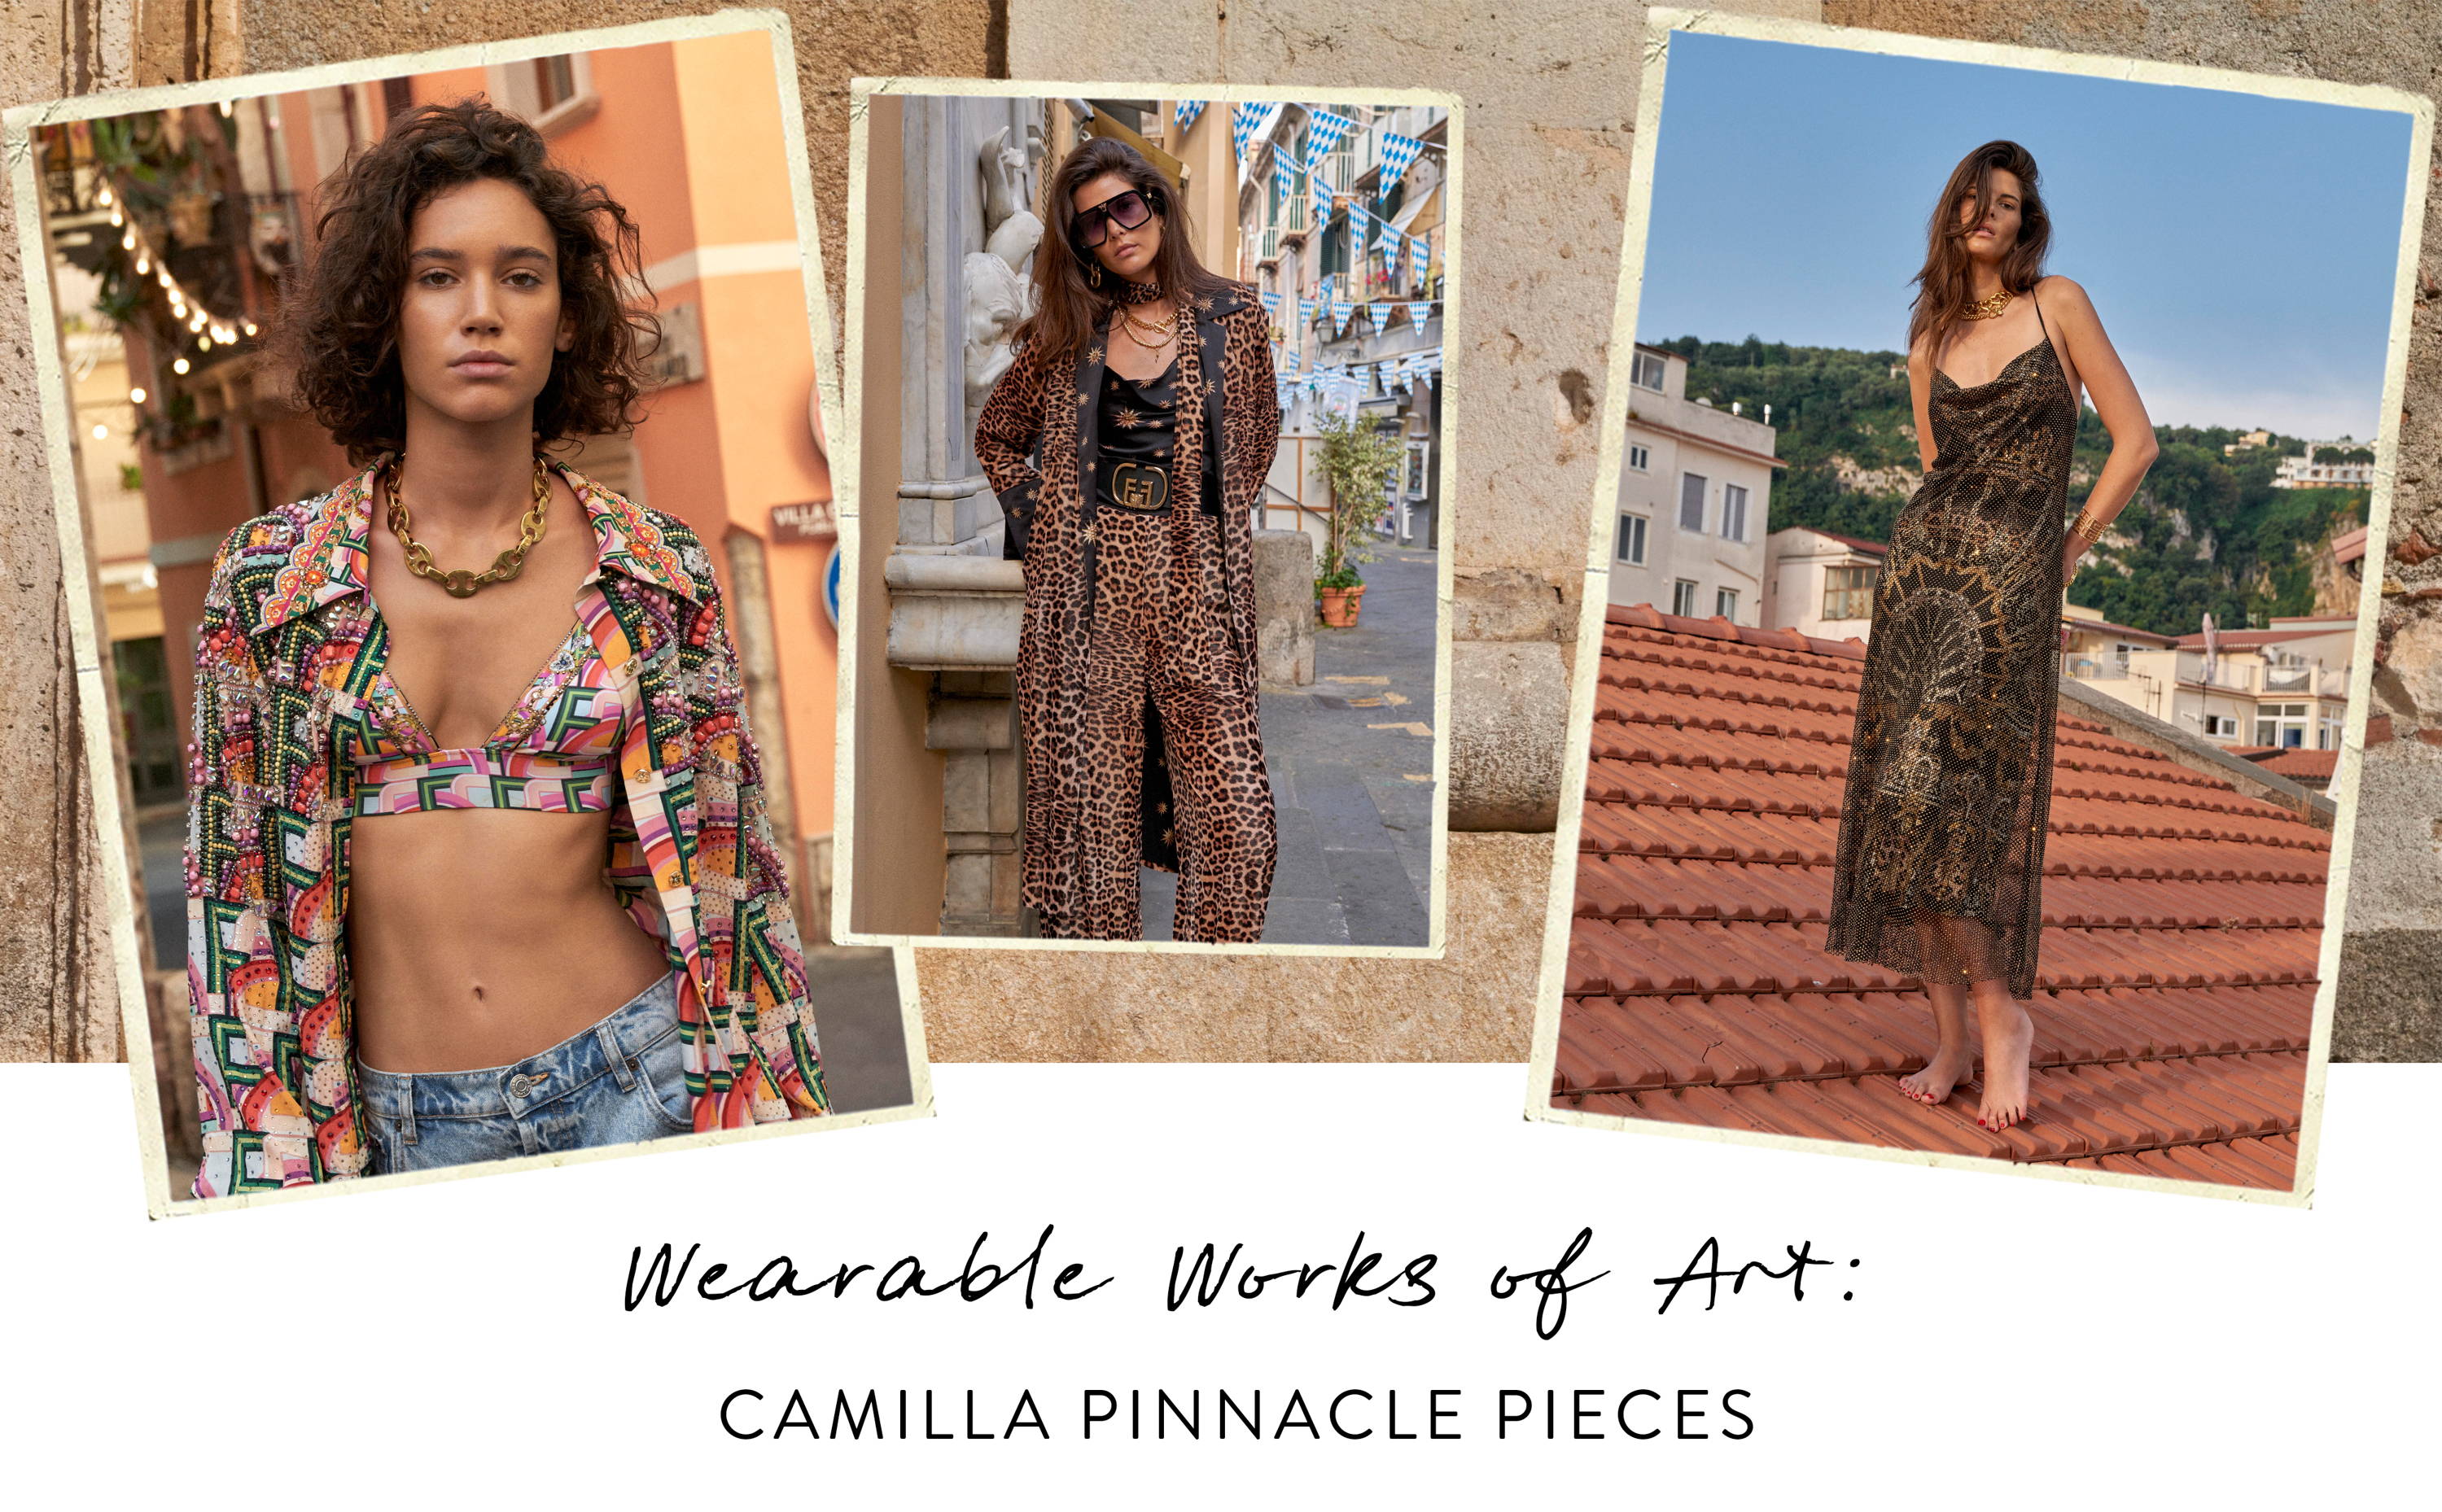 Wearable Works of Art: CAMILLA PINNACLE PIECES